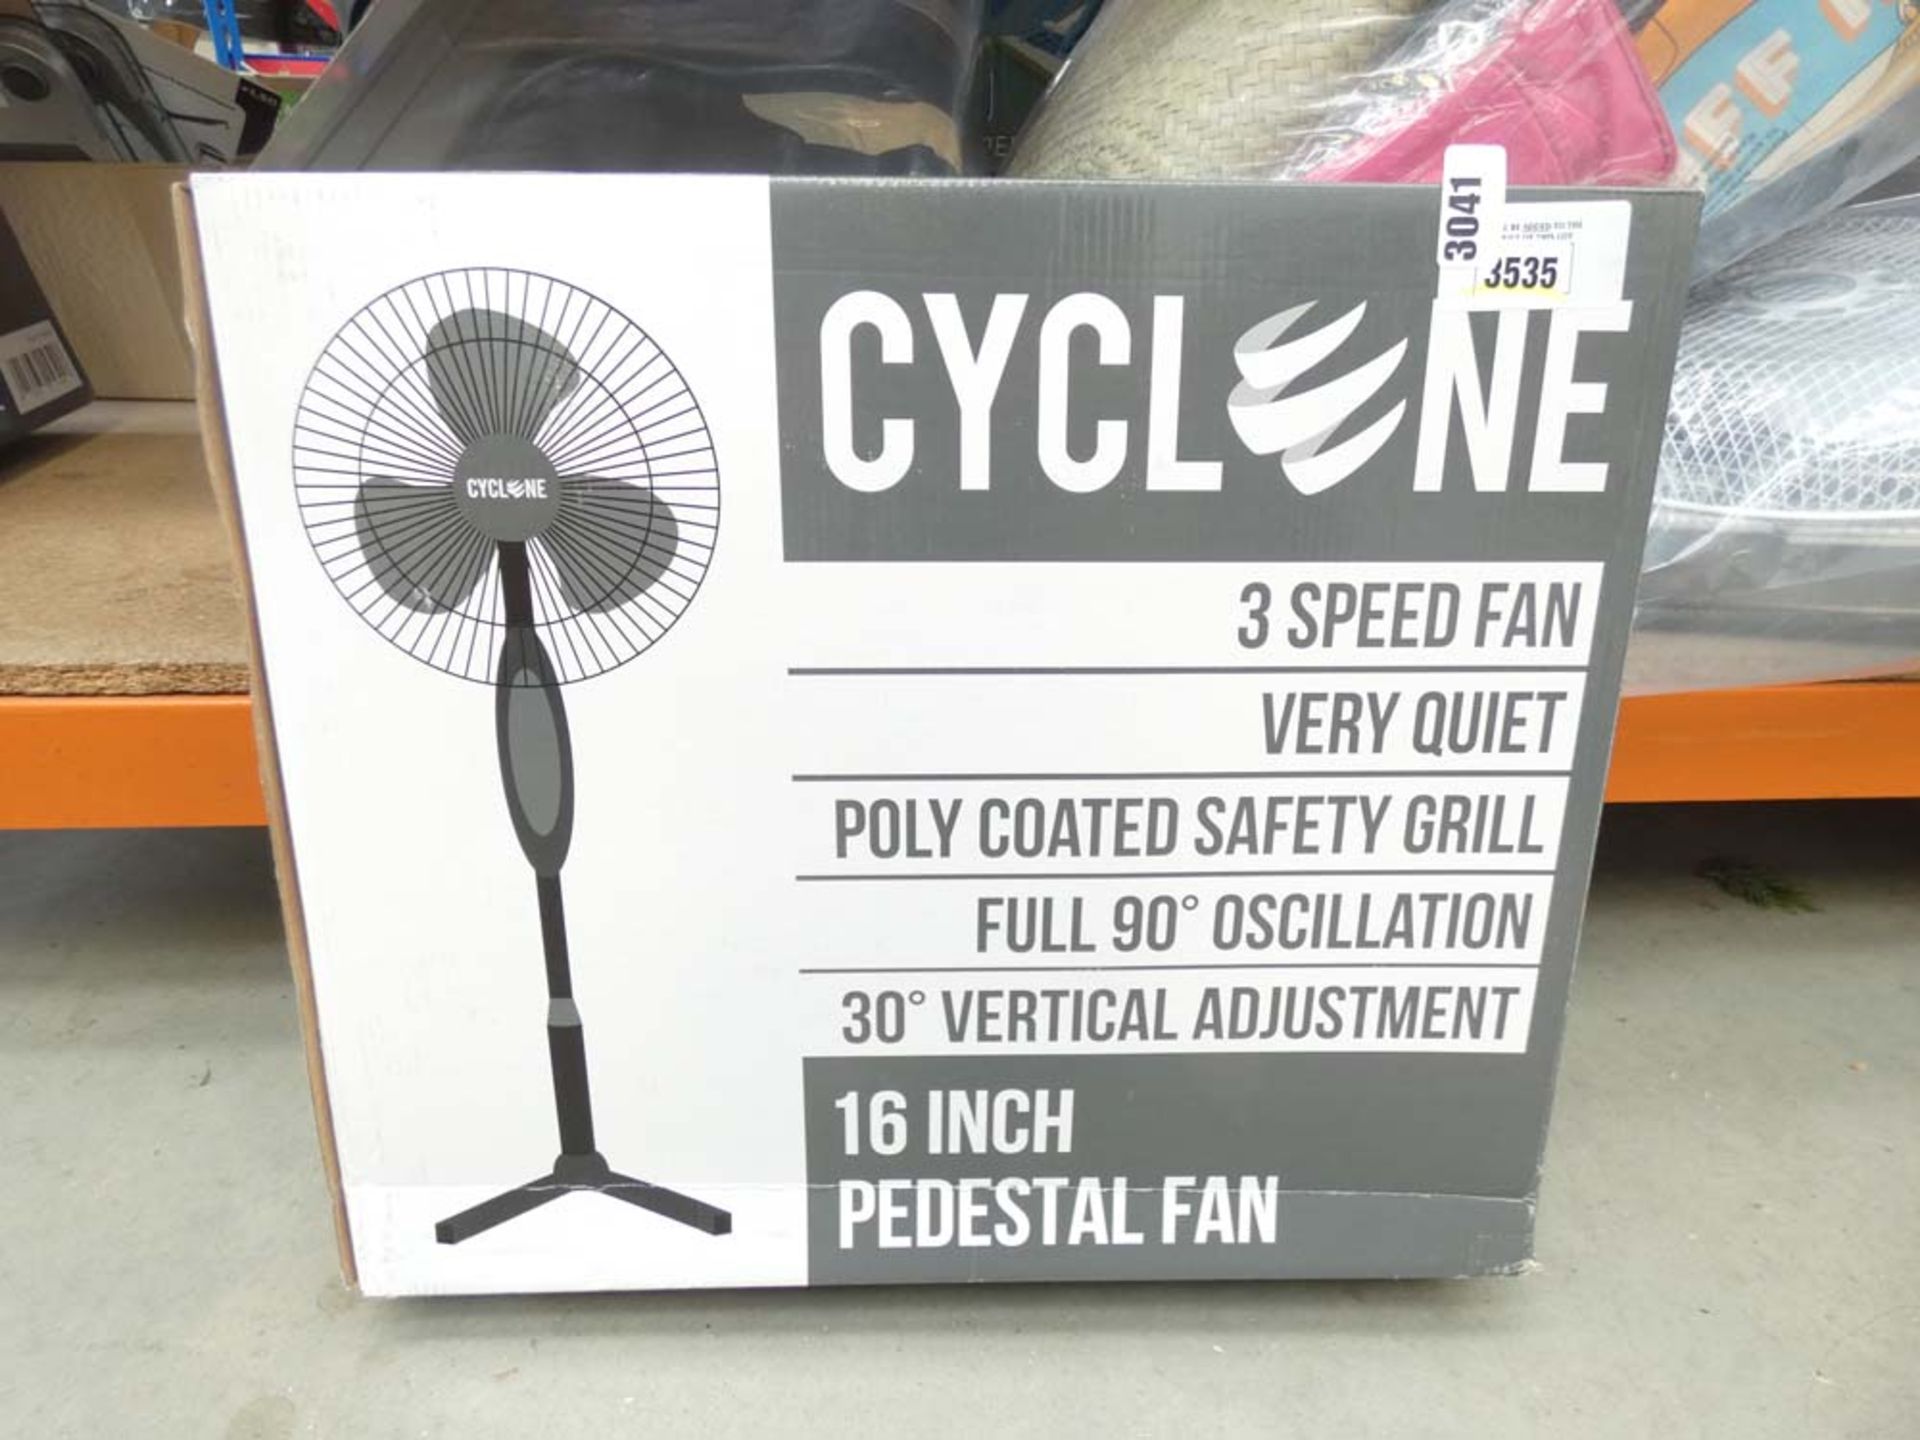 3535 Boxed Cyclone 3 spin fan